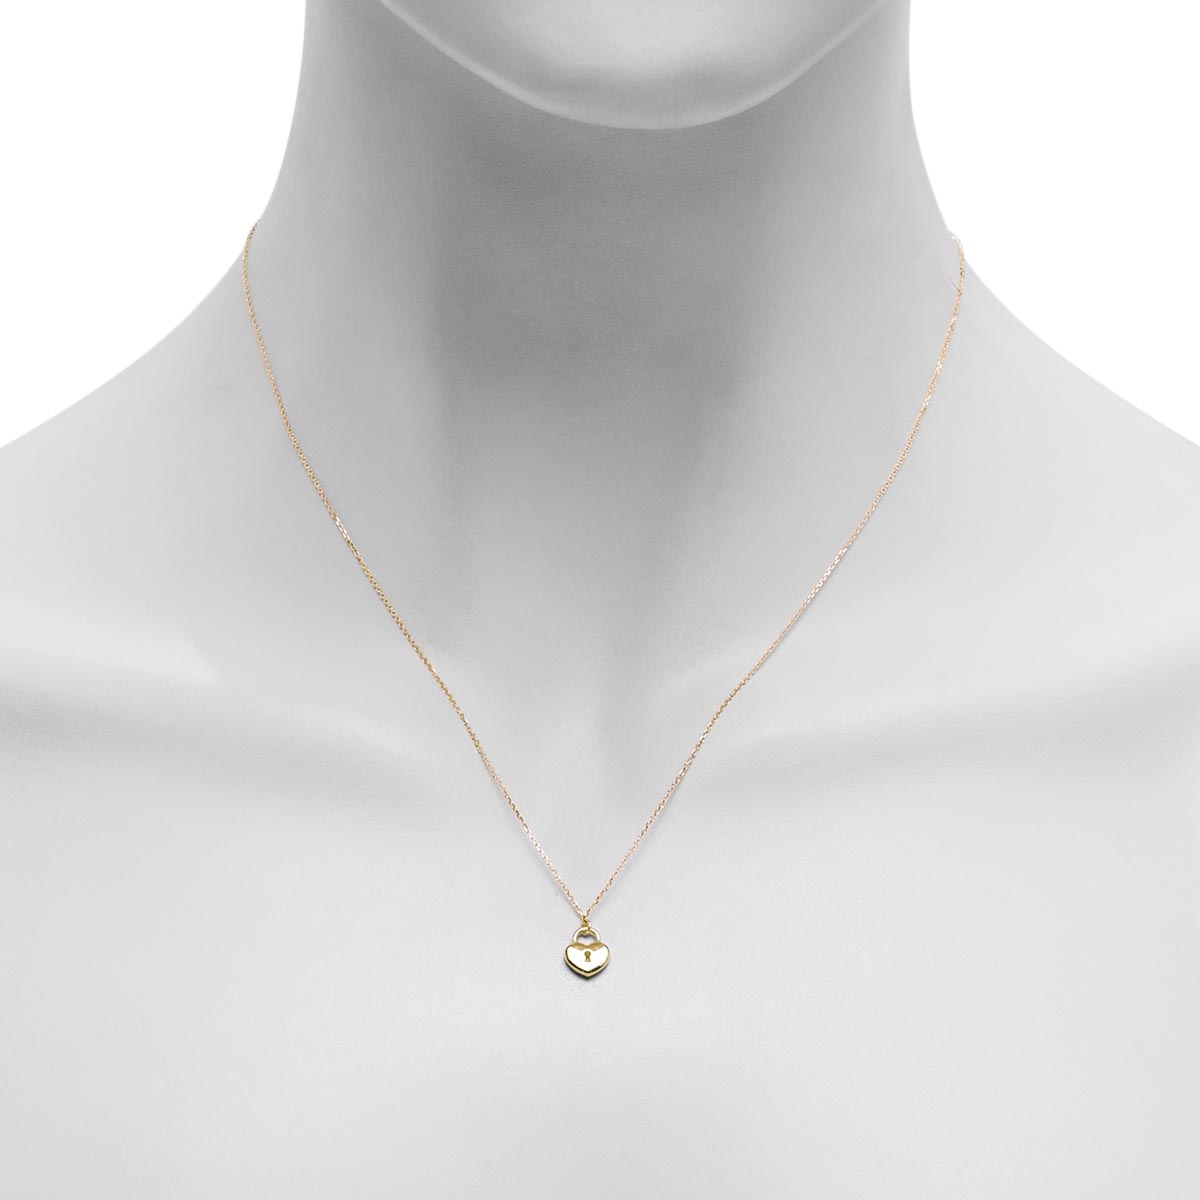 Heart Lock Necklace in 14kt Yellow Gold